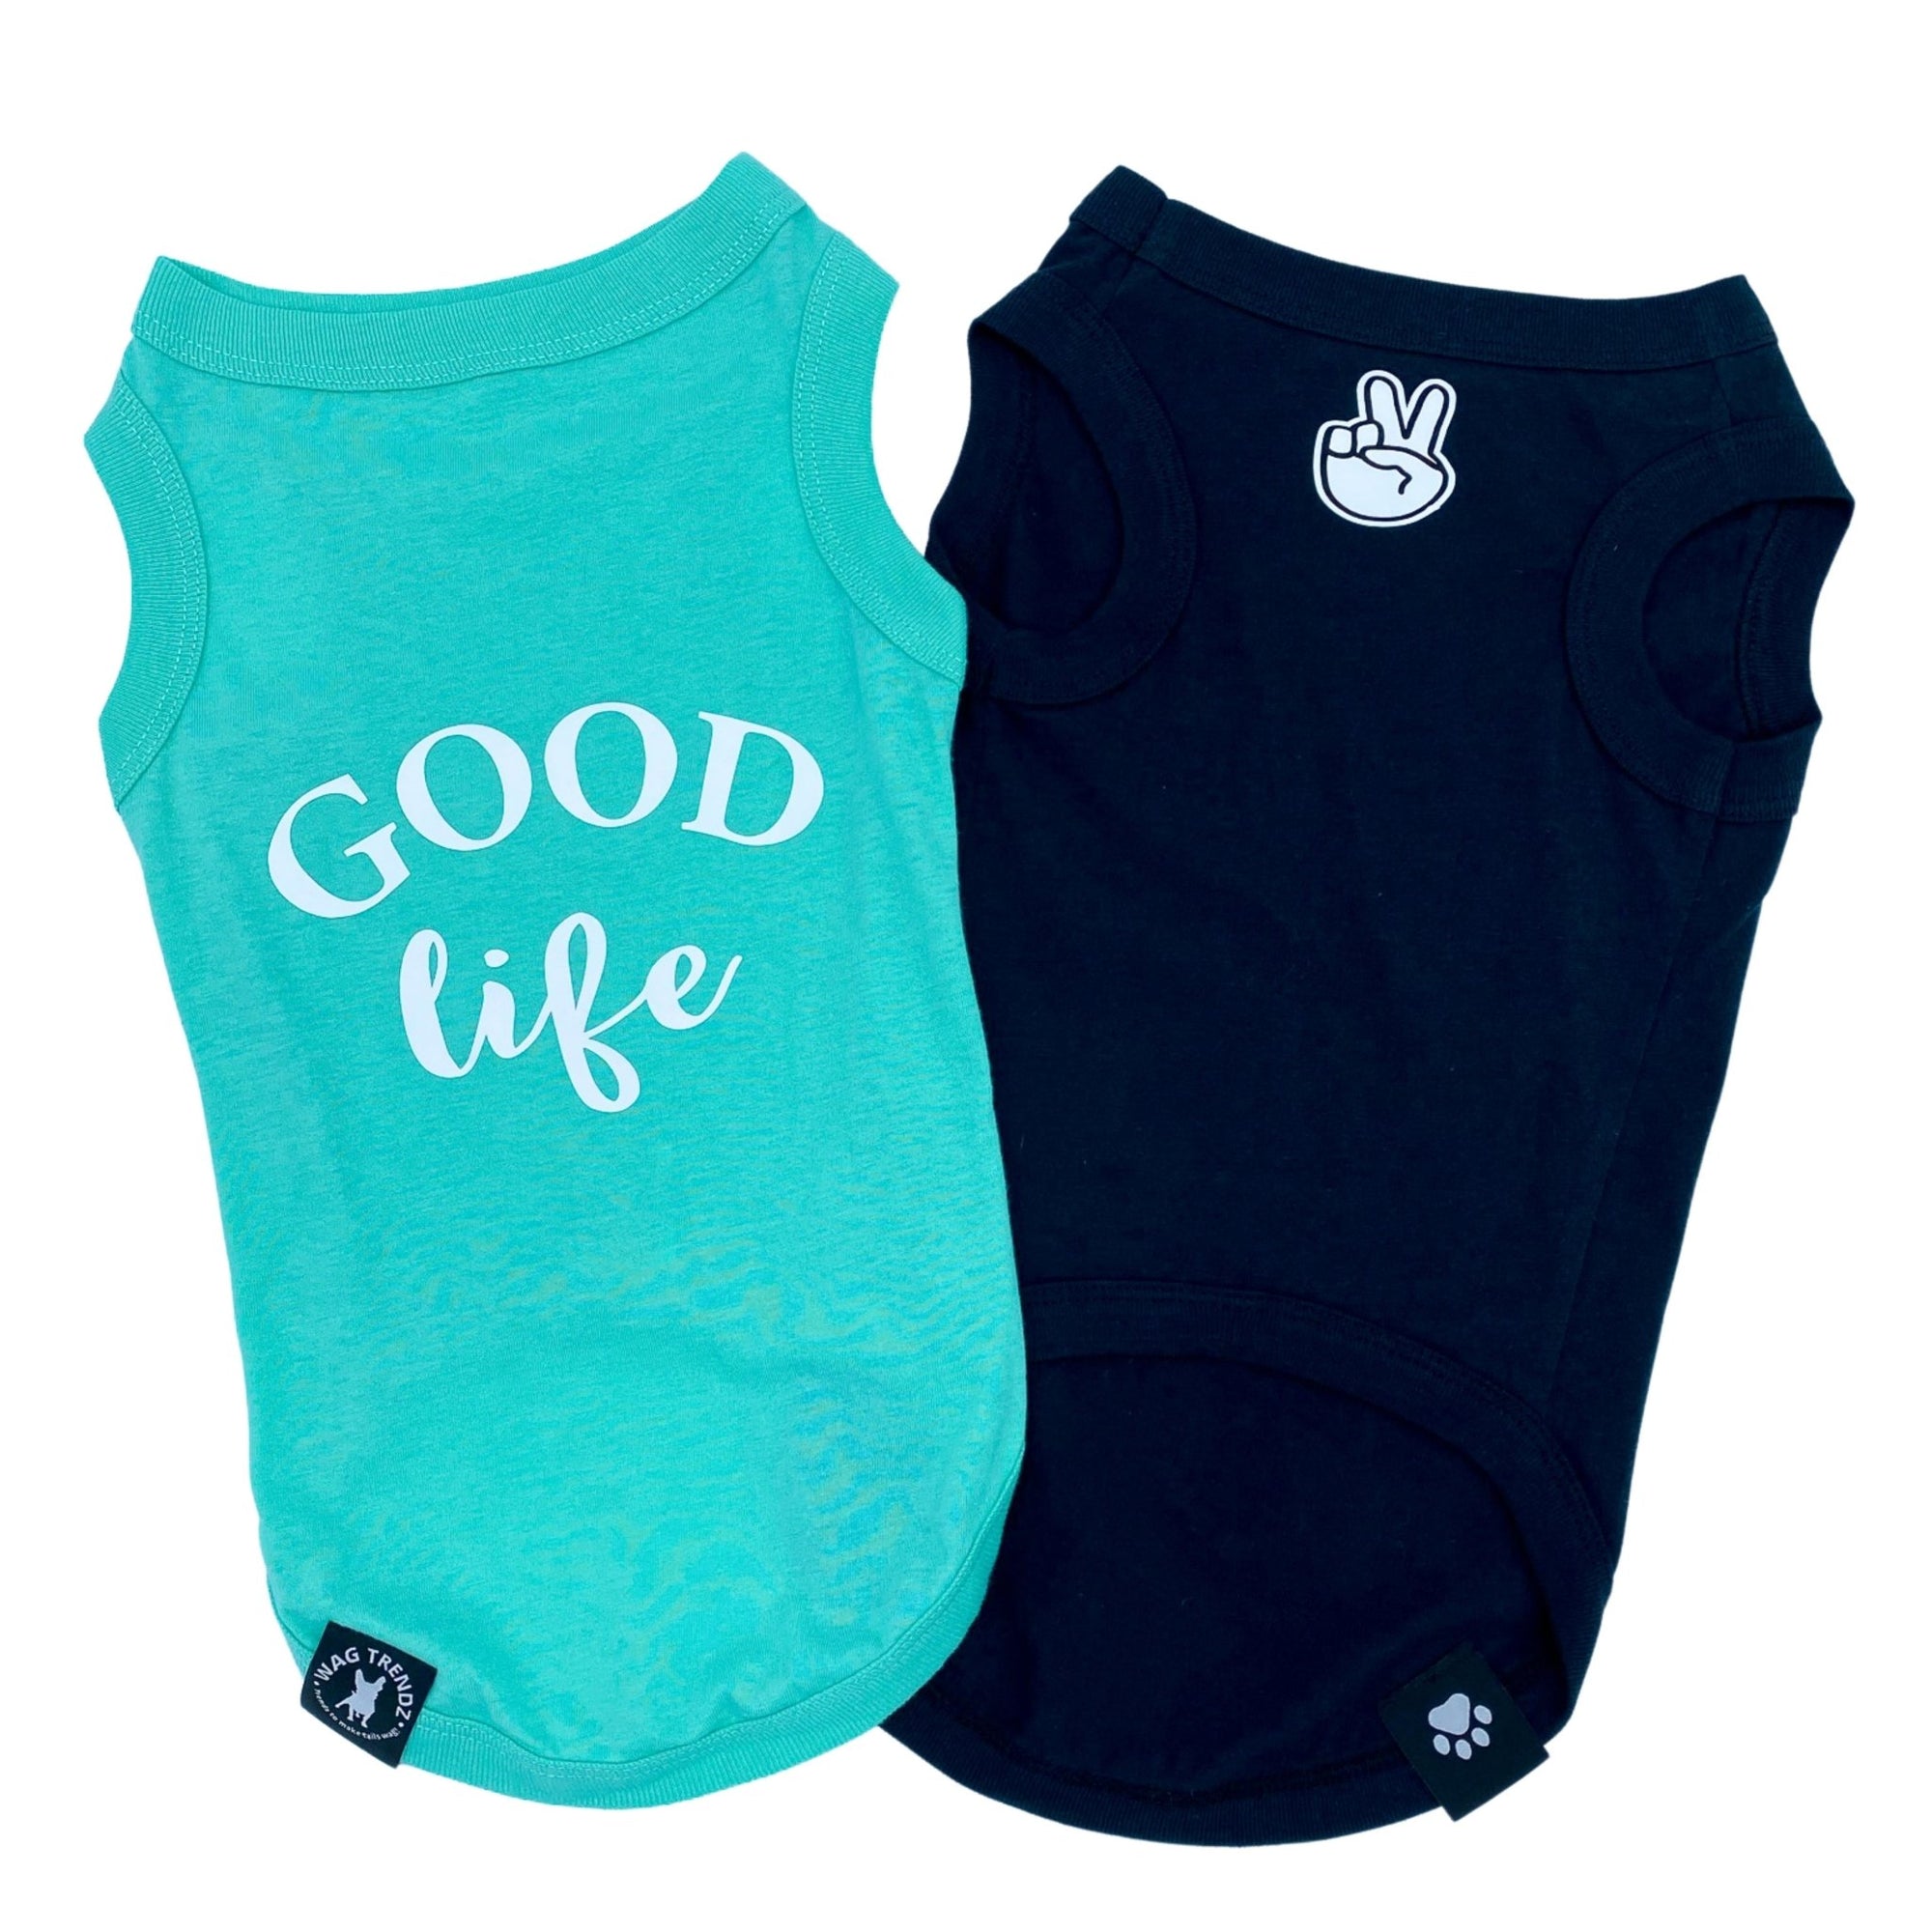 Dog T-Shirt - &quot;Good Life&quot; - Teal and Black - teal t-shirt has the words Good Life in white lettering on the back and black t-shirt has finger peace sign emoji on chest - against a solid white background - Wag Trendz